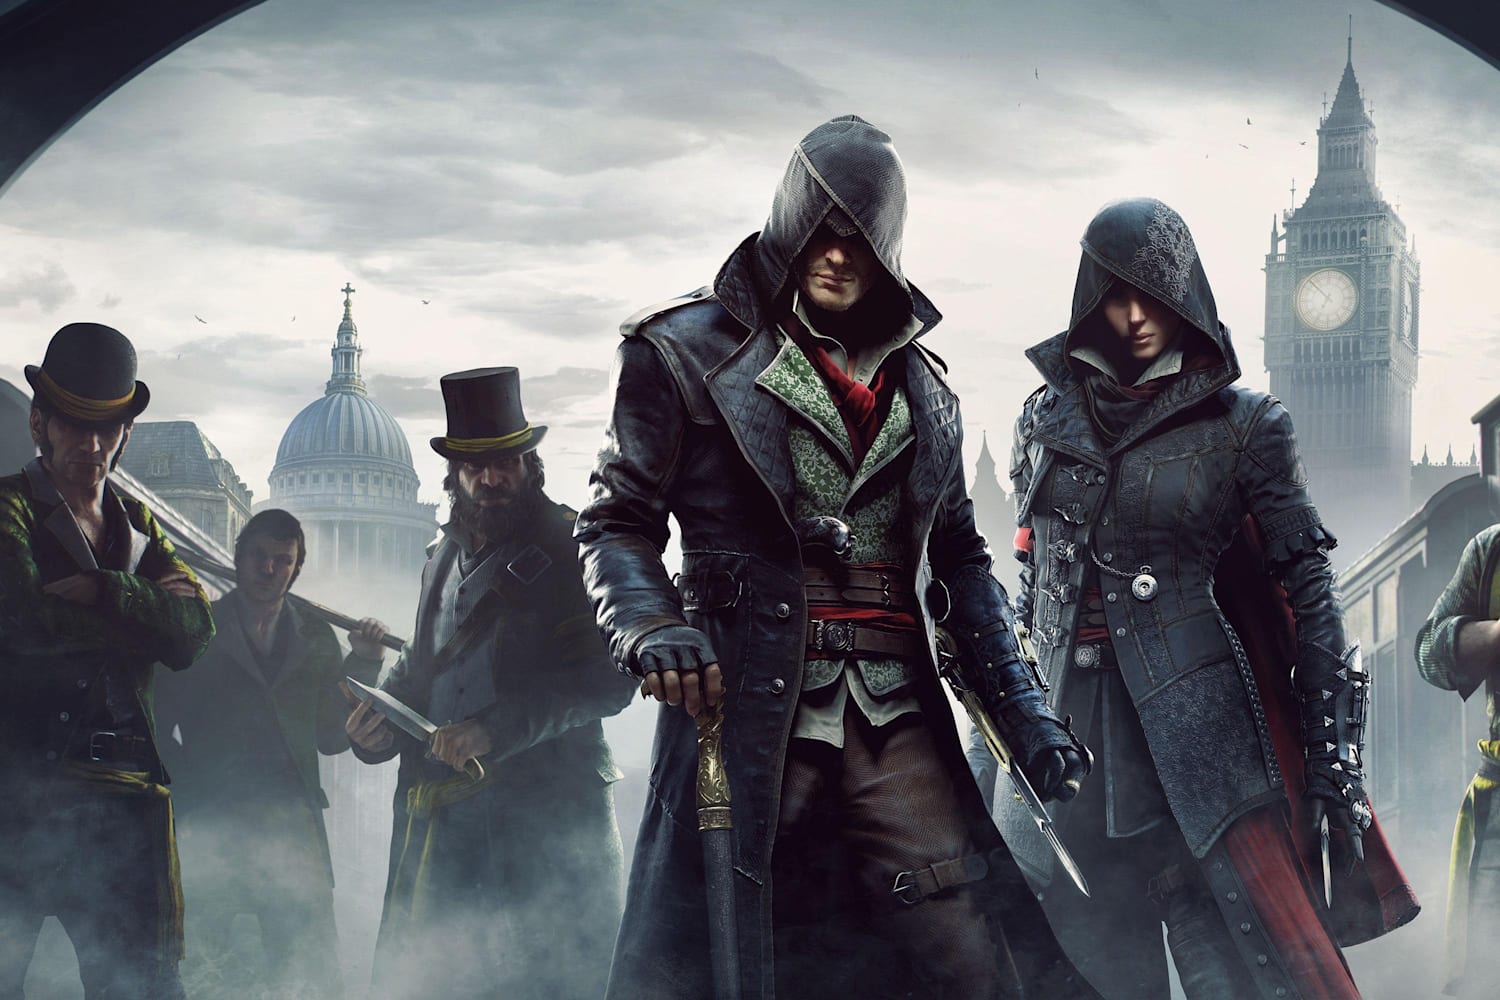 Ubisoft is giving away one of my favorite Assassins Creed